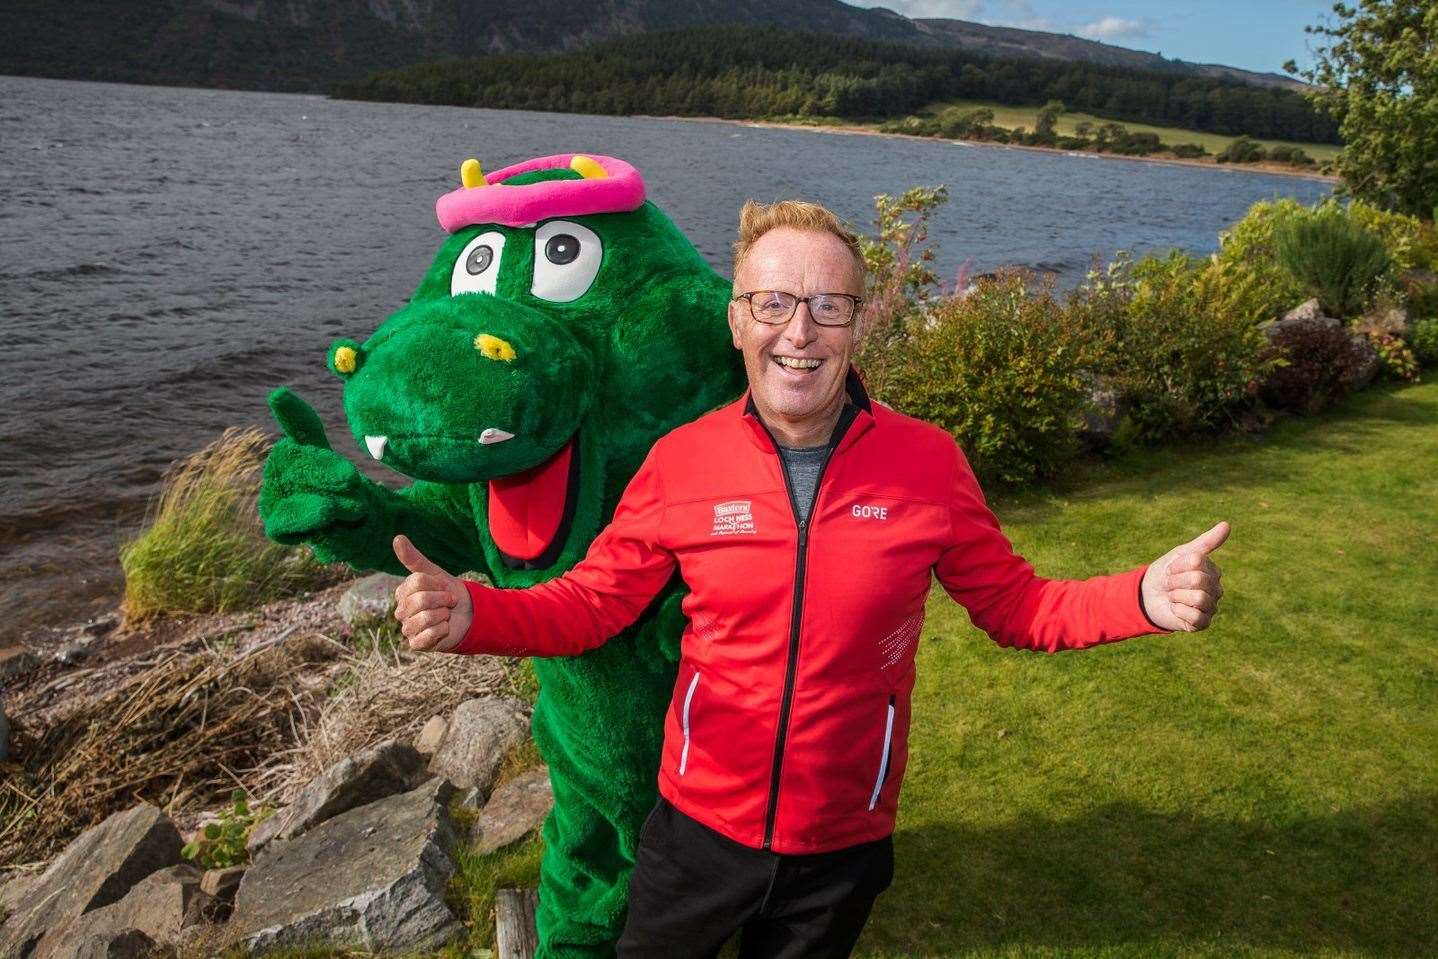 Nessie, pictured here with Bryan Burnett, ran the Loch Ness Marathon's route to officially open early-bird entry to the run.